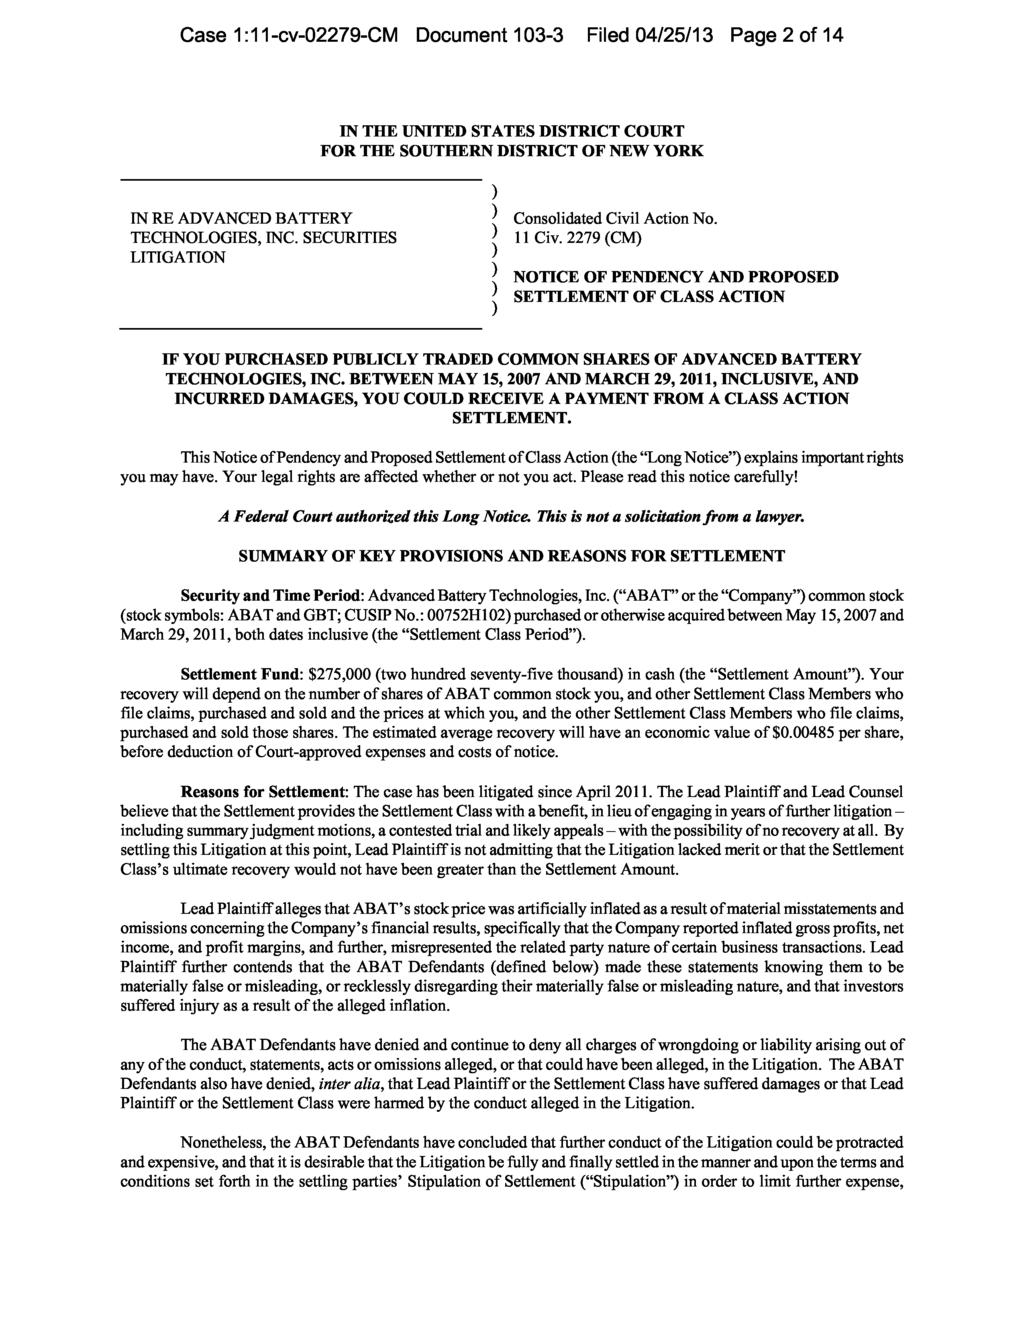 Case 1:11-cv-02279-CM Document 103-3 Filed 04/25/13 Page 2 of 14 IN THE UNITED STATES DISTRICT COURT FOR THE SOUTHERN DISTRICT OF NEW YORK IN RE ADVANCED BATTERY TECHNOLOGIES, INC.